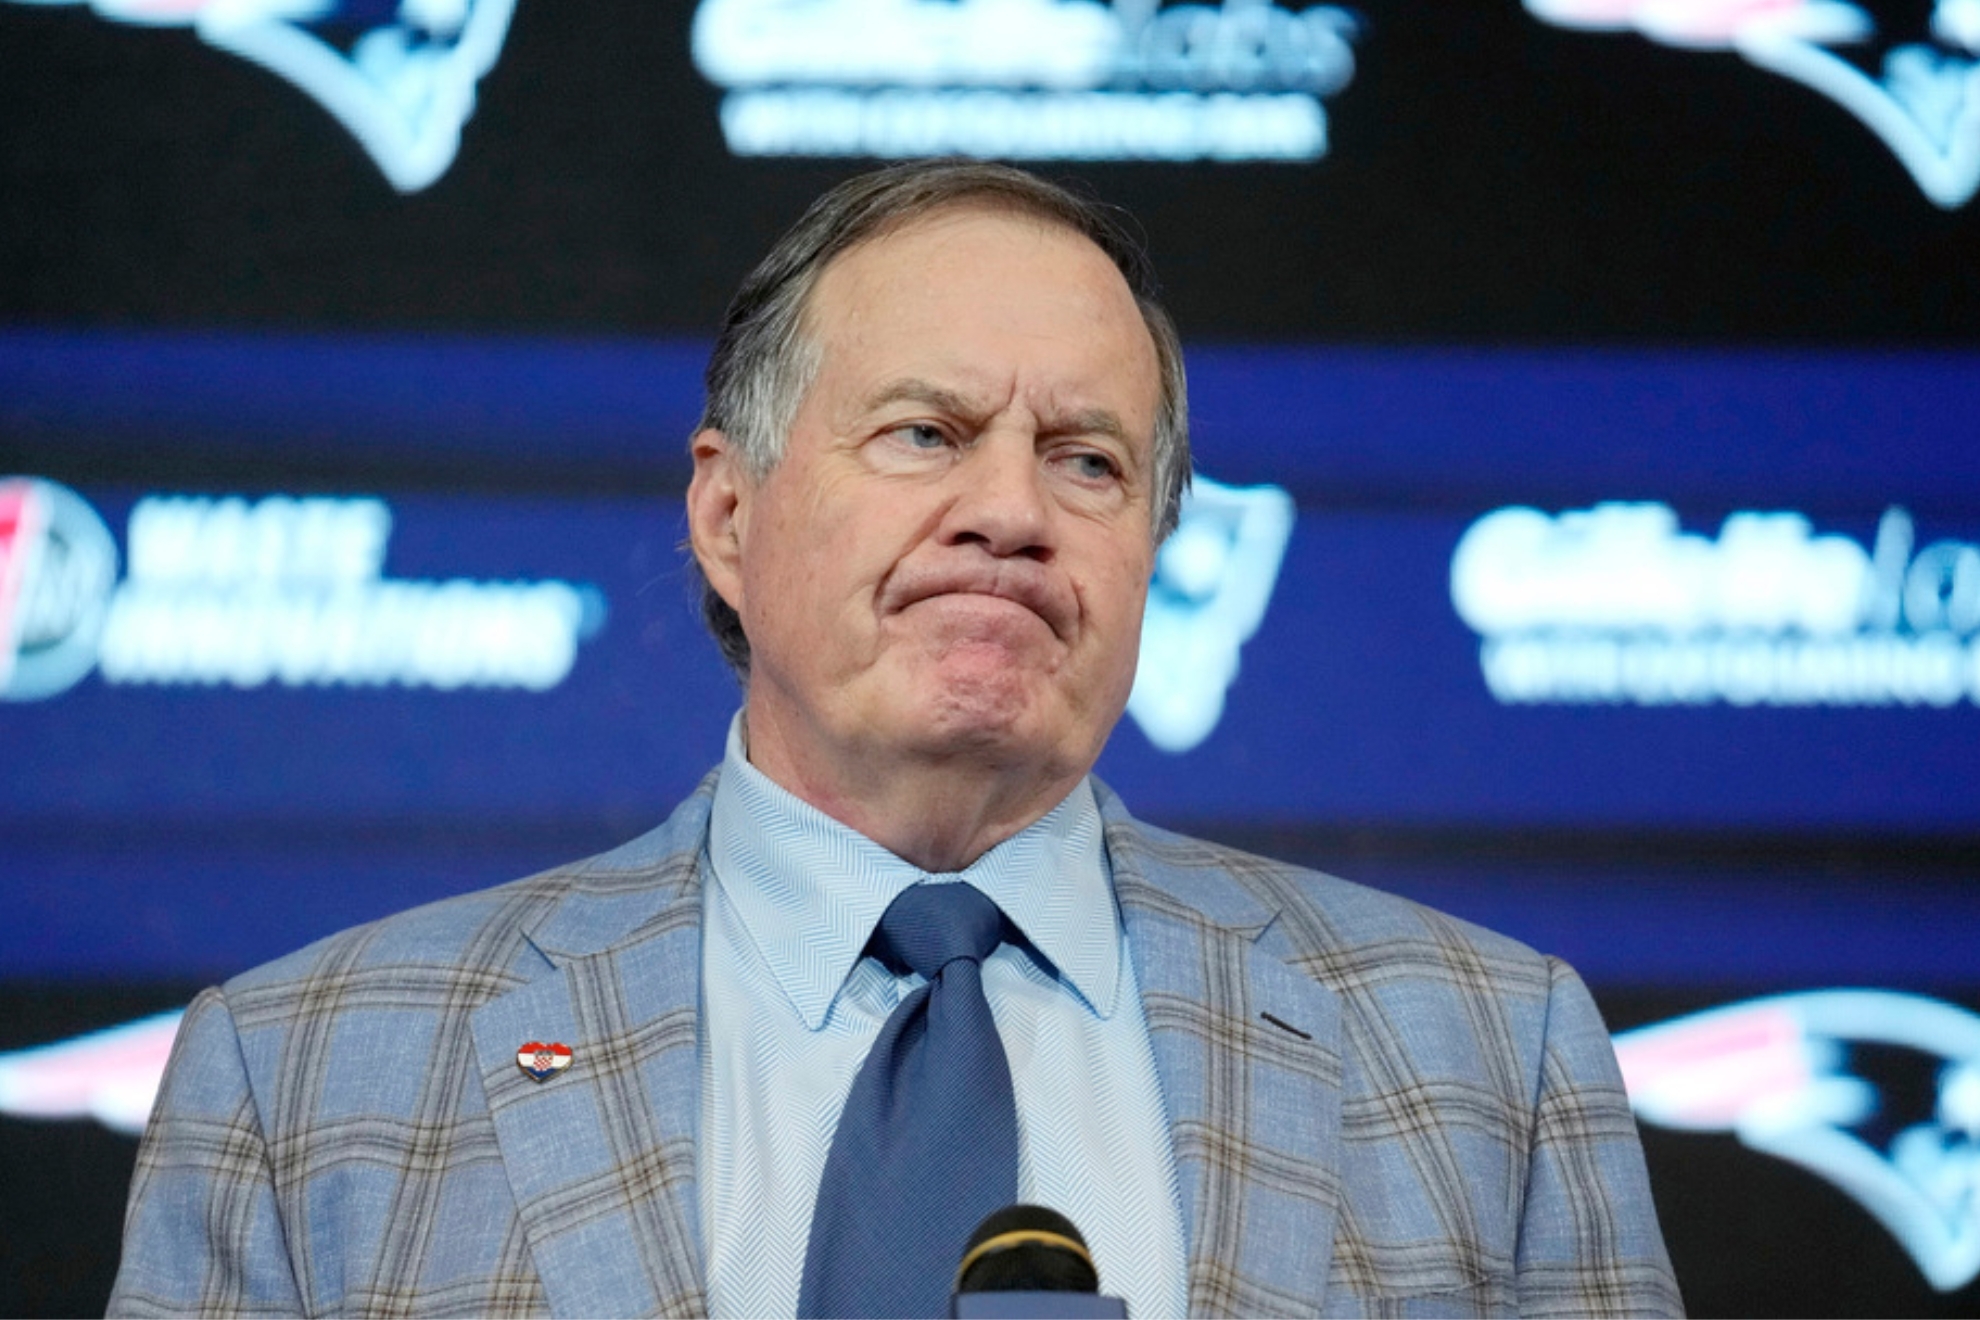 Bill Belichick is not receiving as many interviews as most people believed